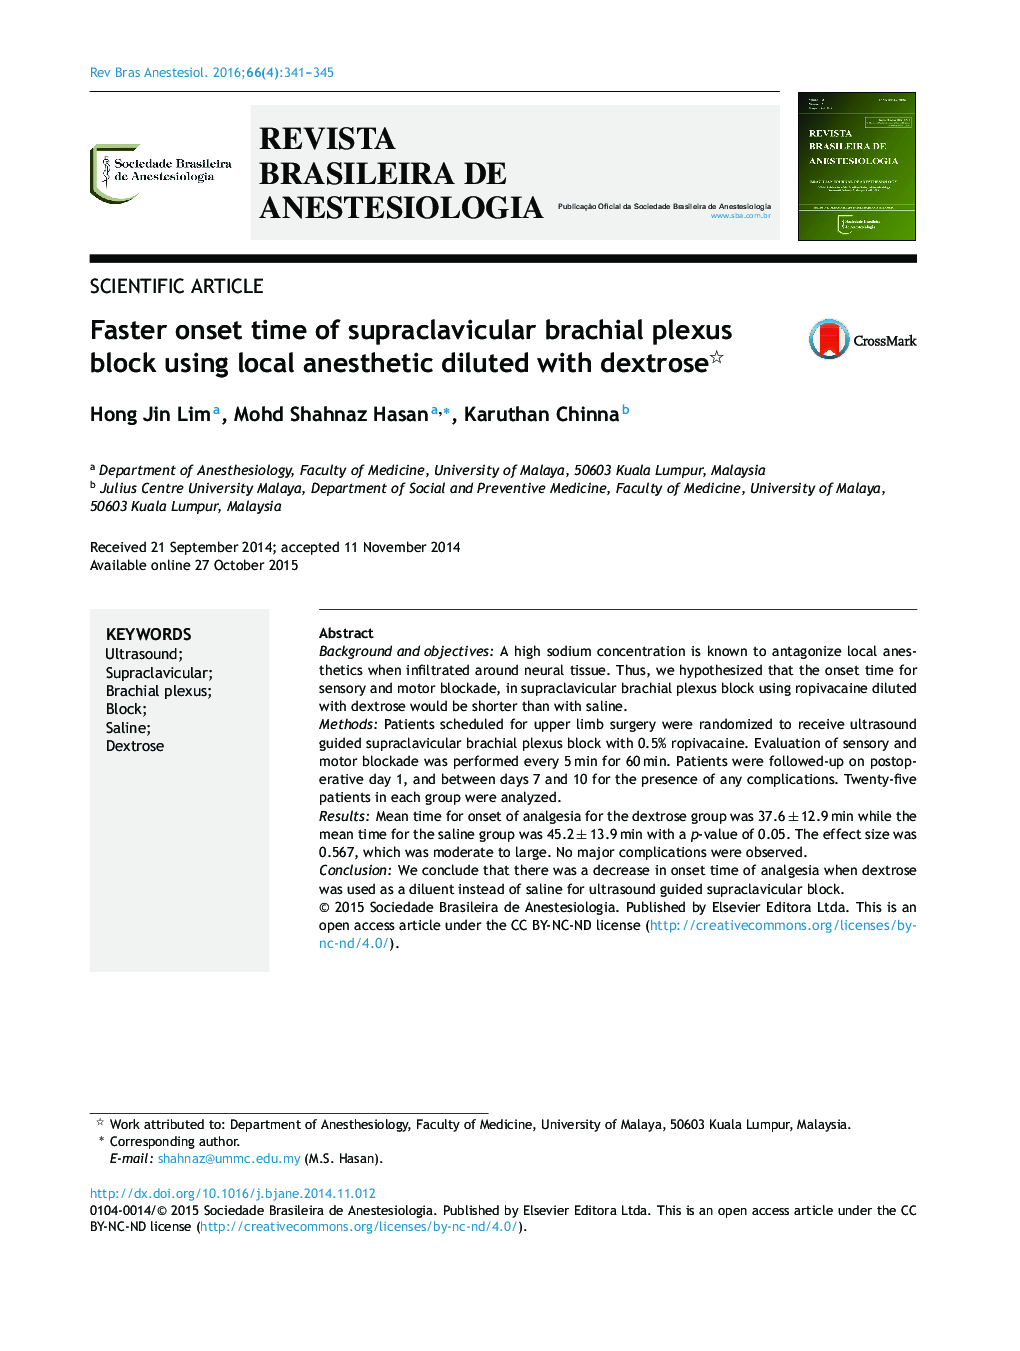 Faster onset time of supraclavicular brachial plexus block using local anesthetic diluted with dextrose 